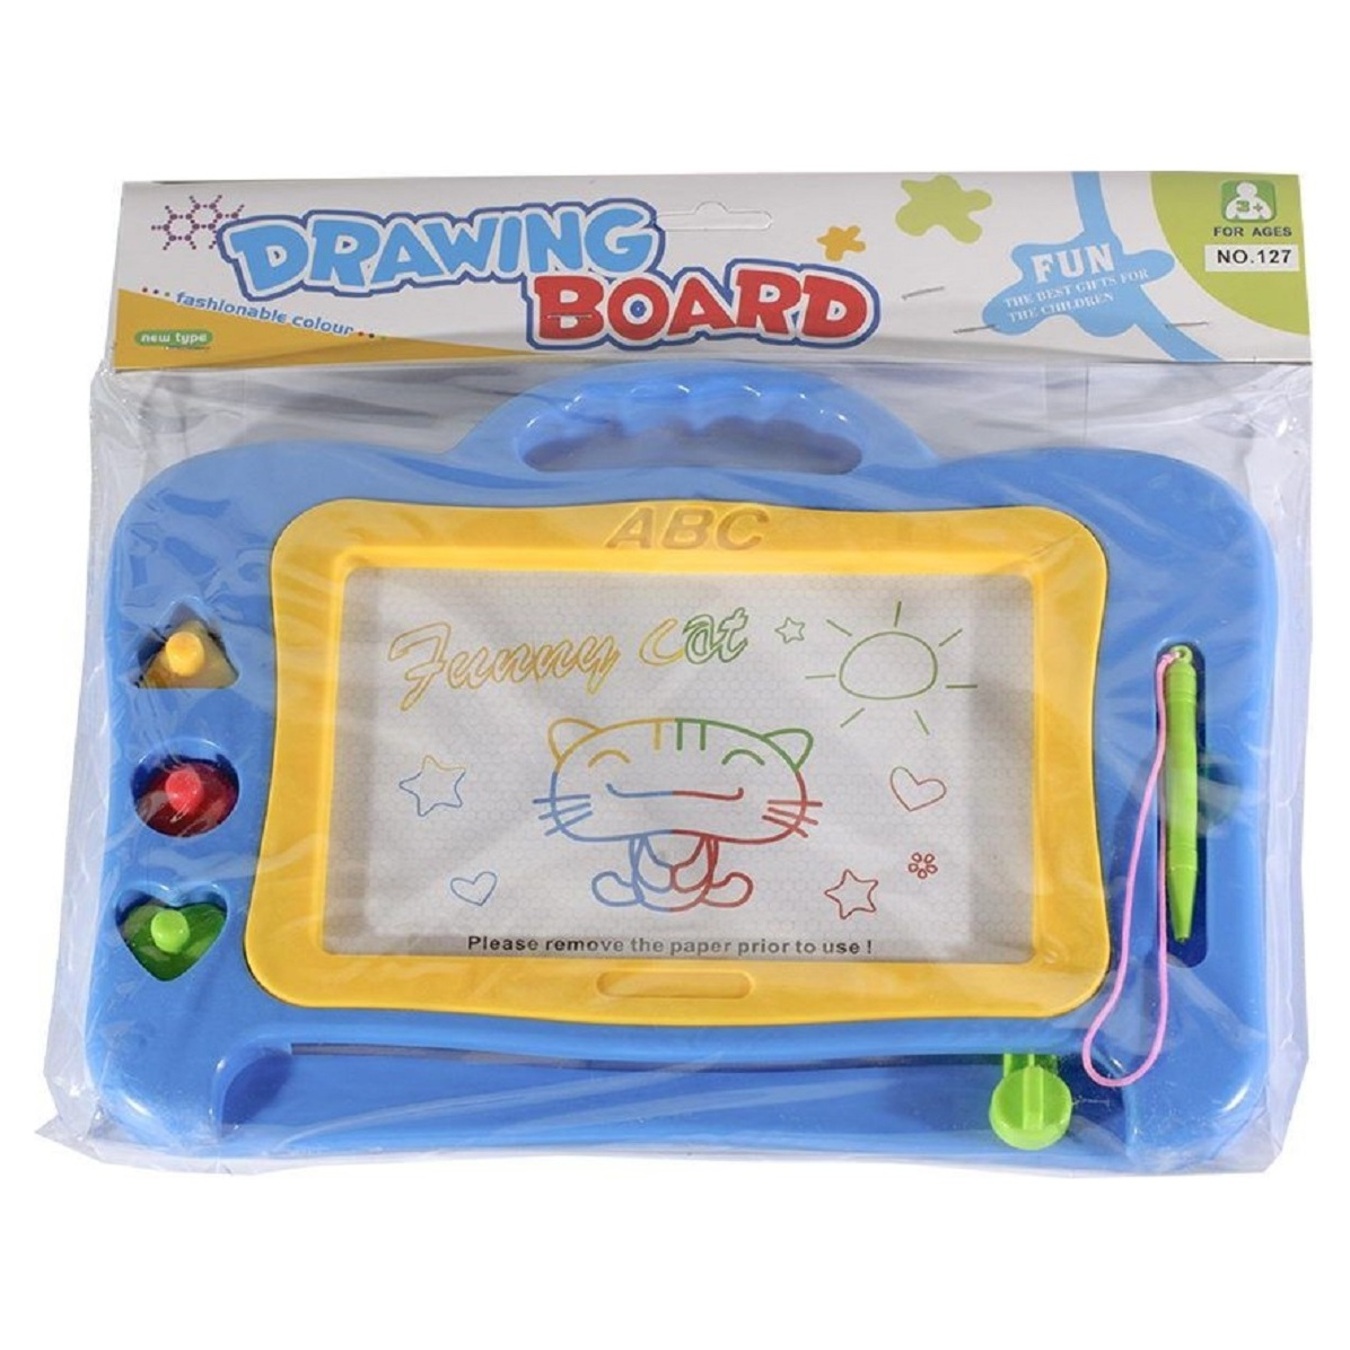 Children's tabletop drawing board game MAYA TOYS 2